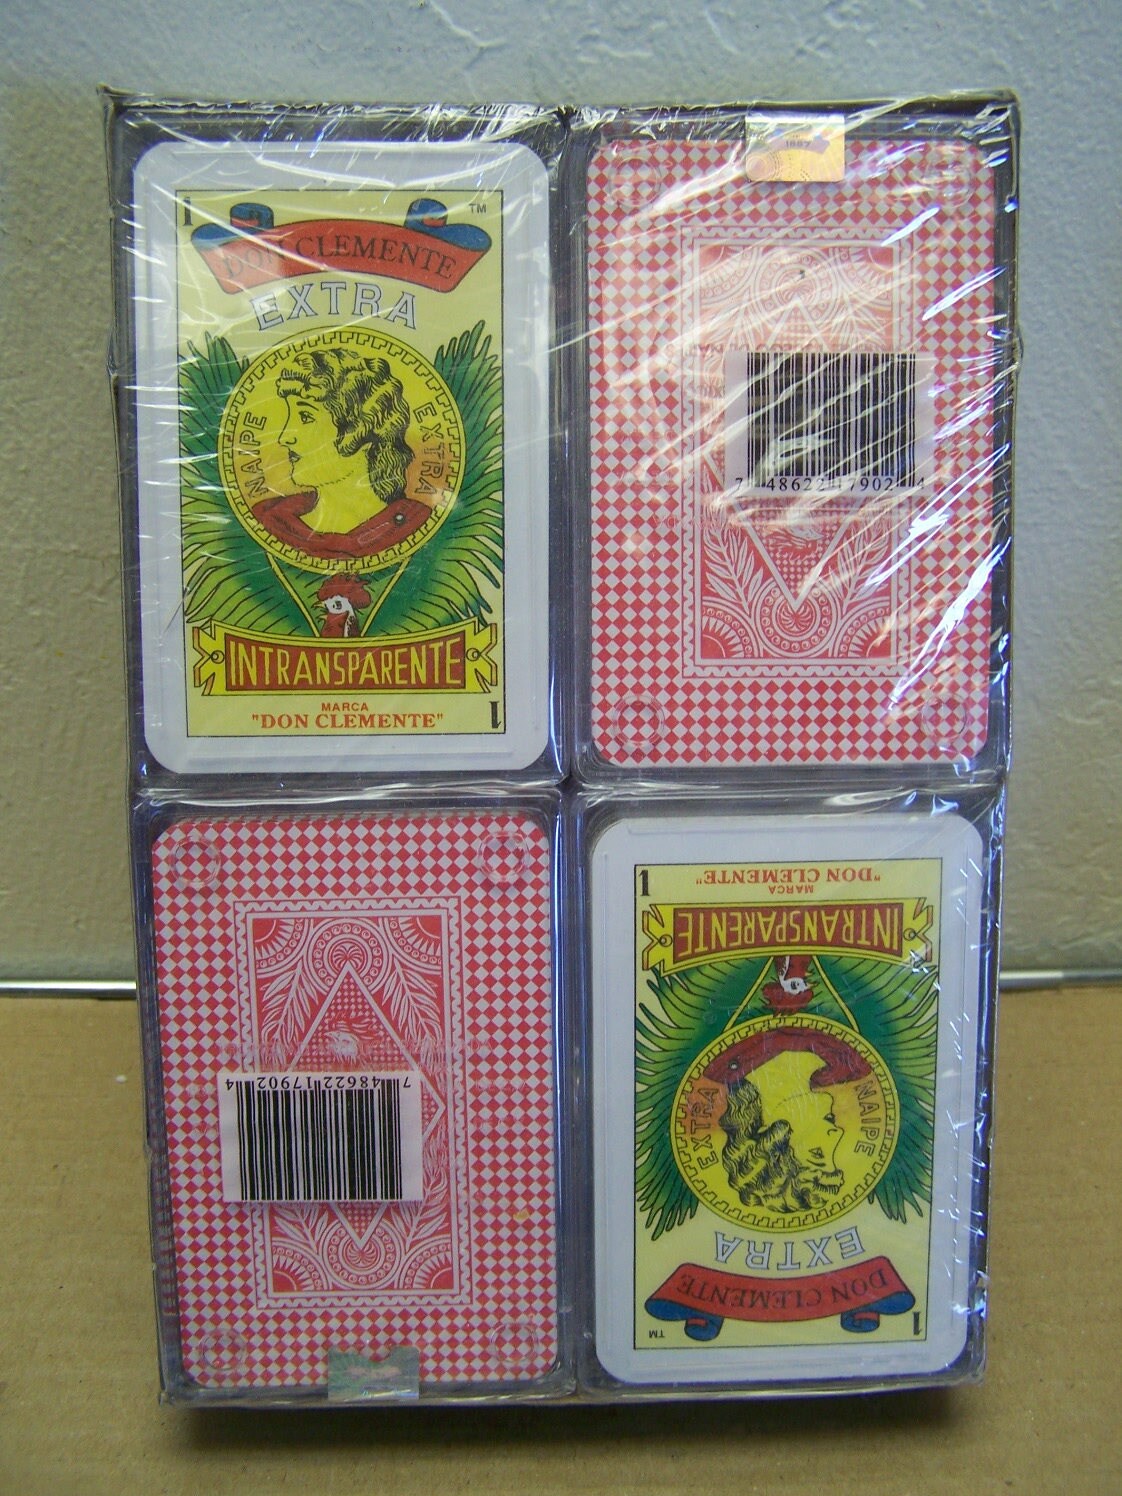 Wholesale Lot of 12 Traditional Deck of Spanish/Mexican Playing Cards in Hard Plastic Case